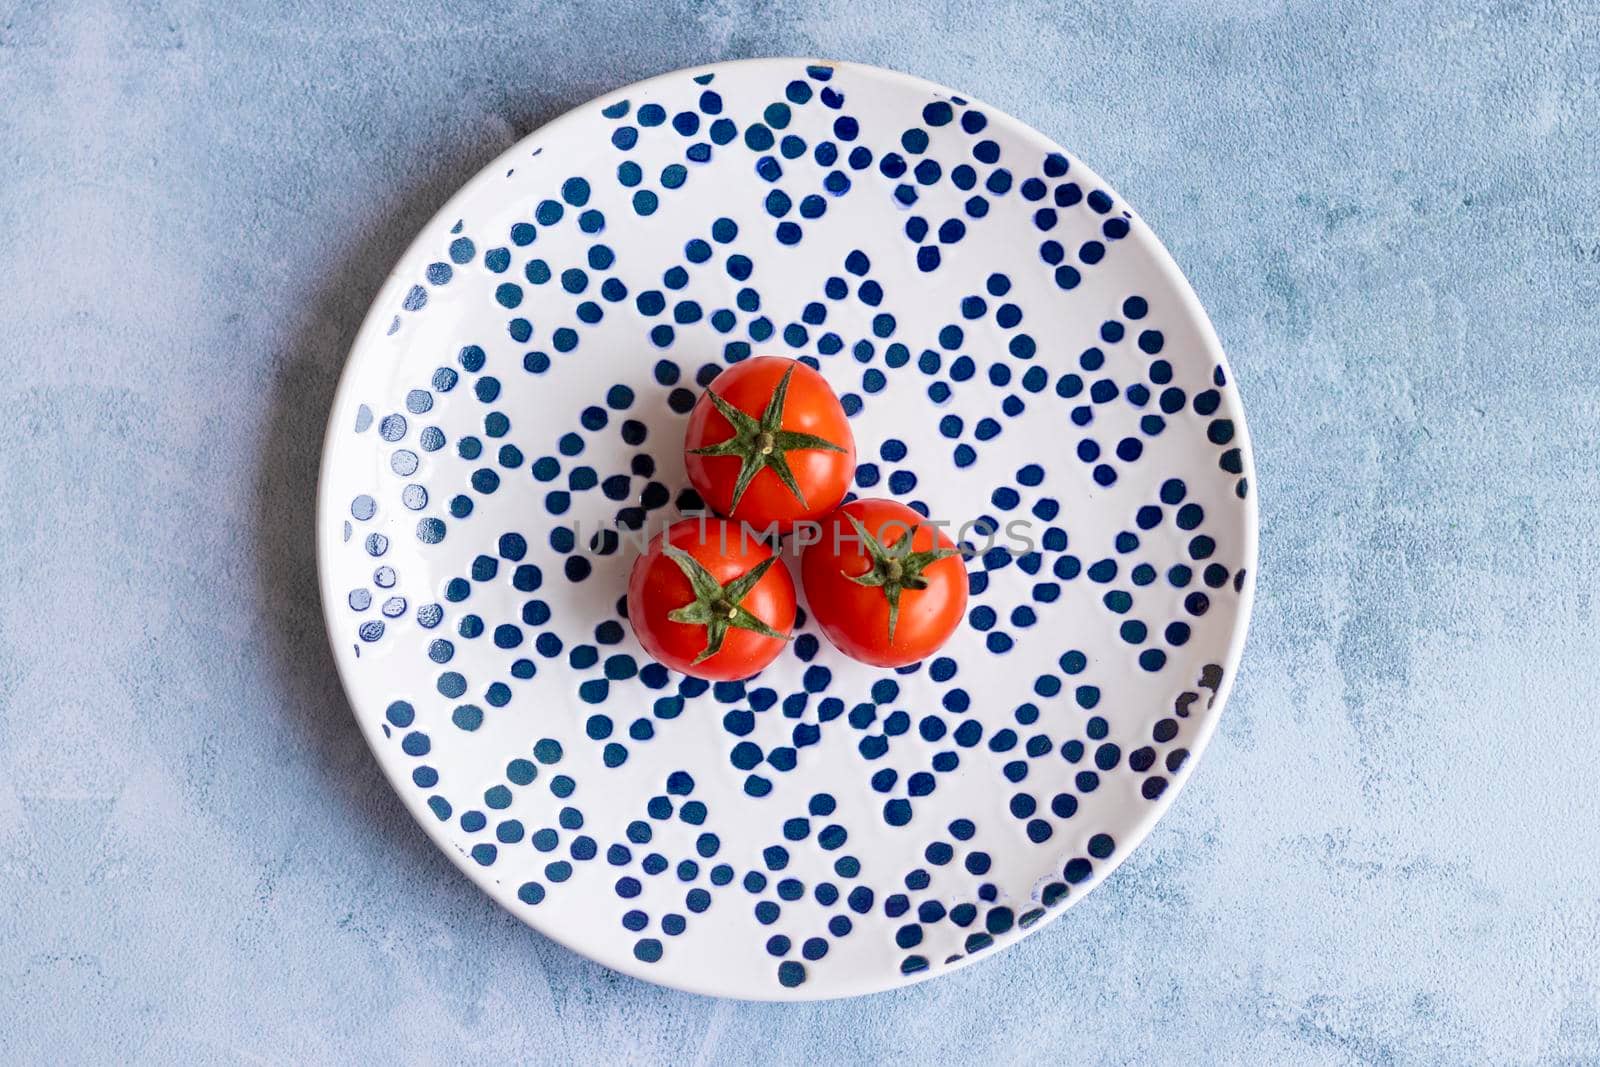 Cherry tomatoes on blue dotted plate